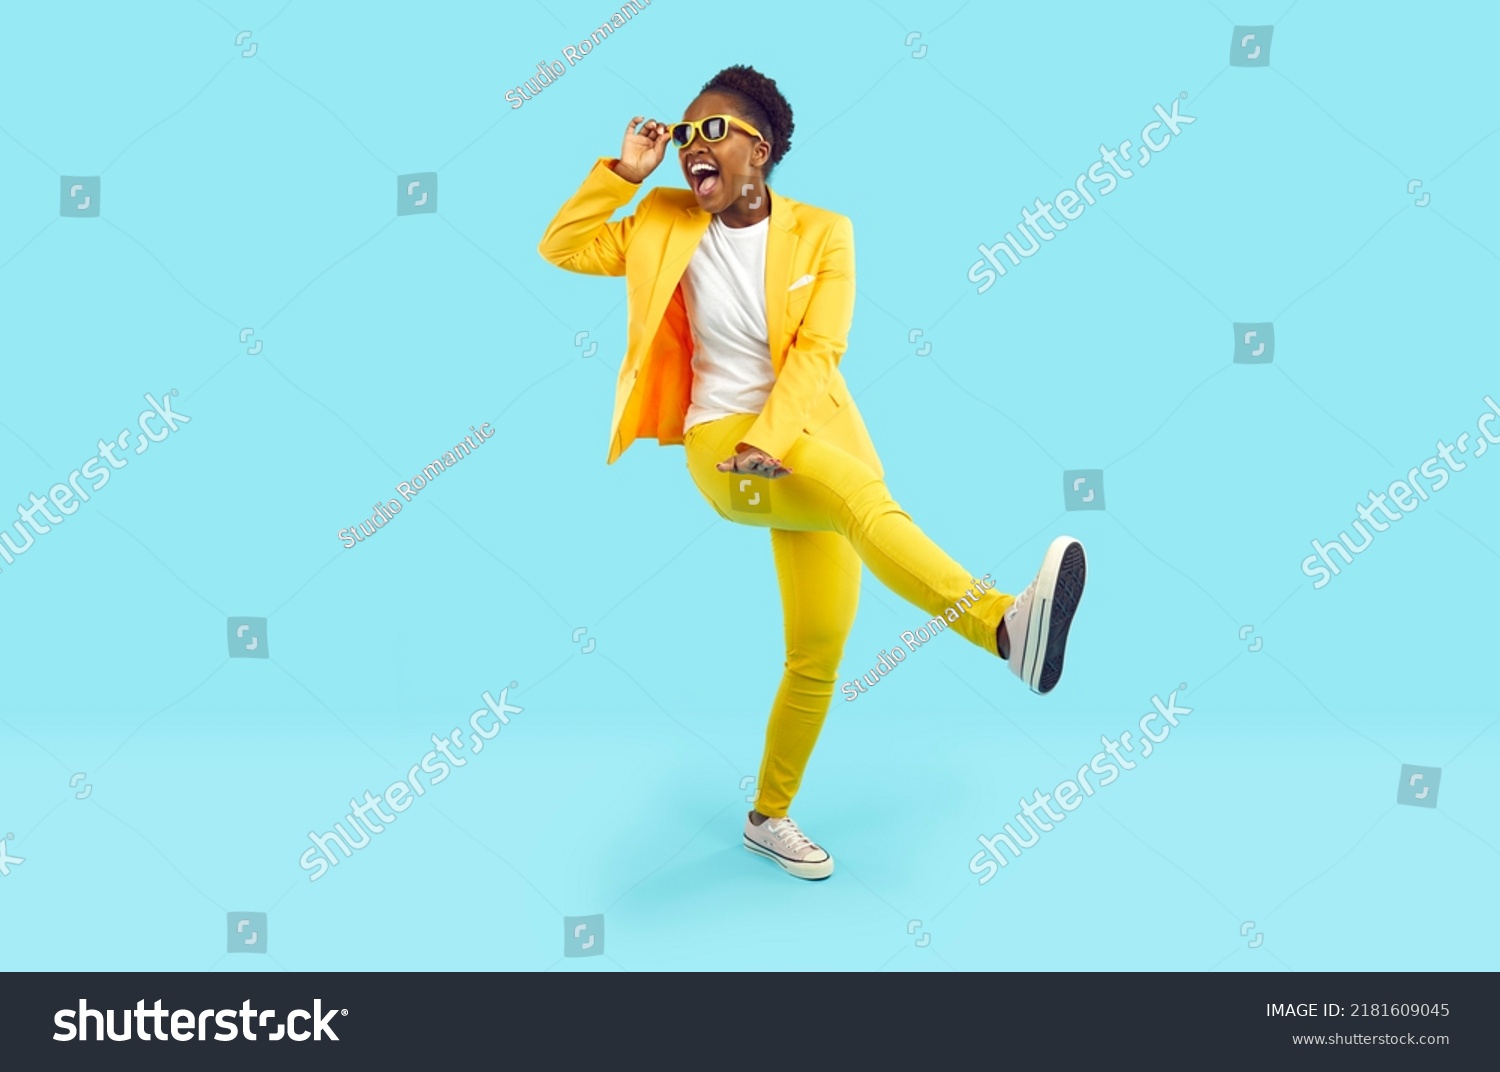 Cheerful young woman having fun, dancing and laughing isolated on light blue background. African American young woman in yellow suit and sunglasses is walking with funny expression on her face. #2181609045